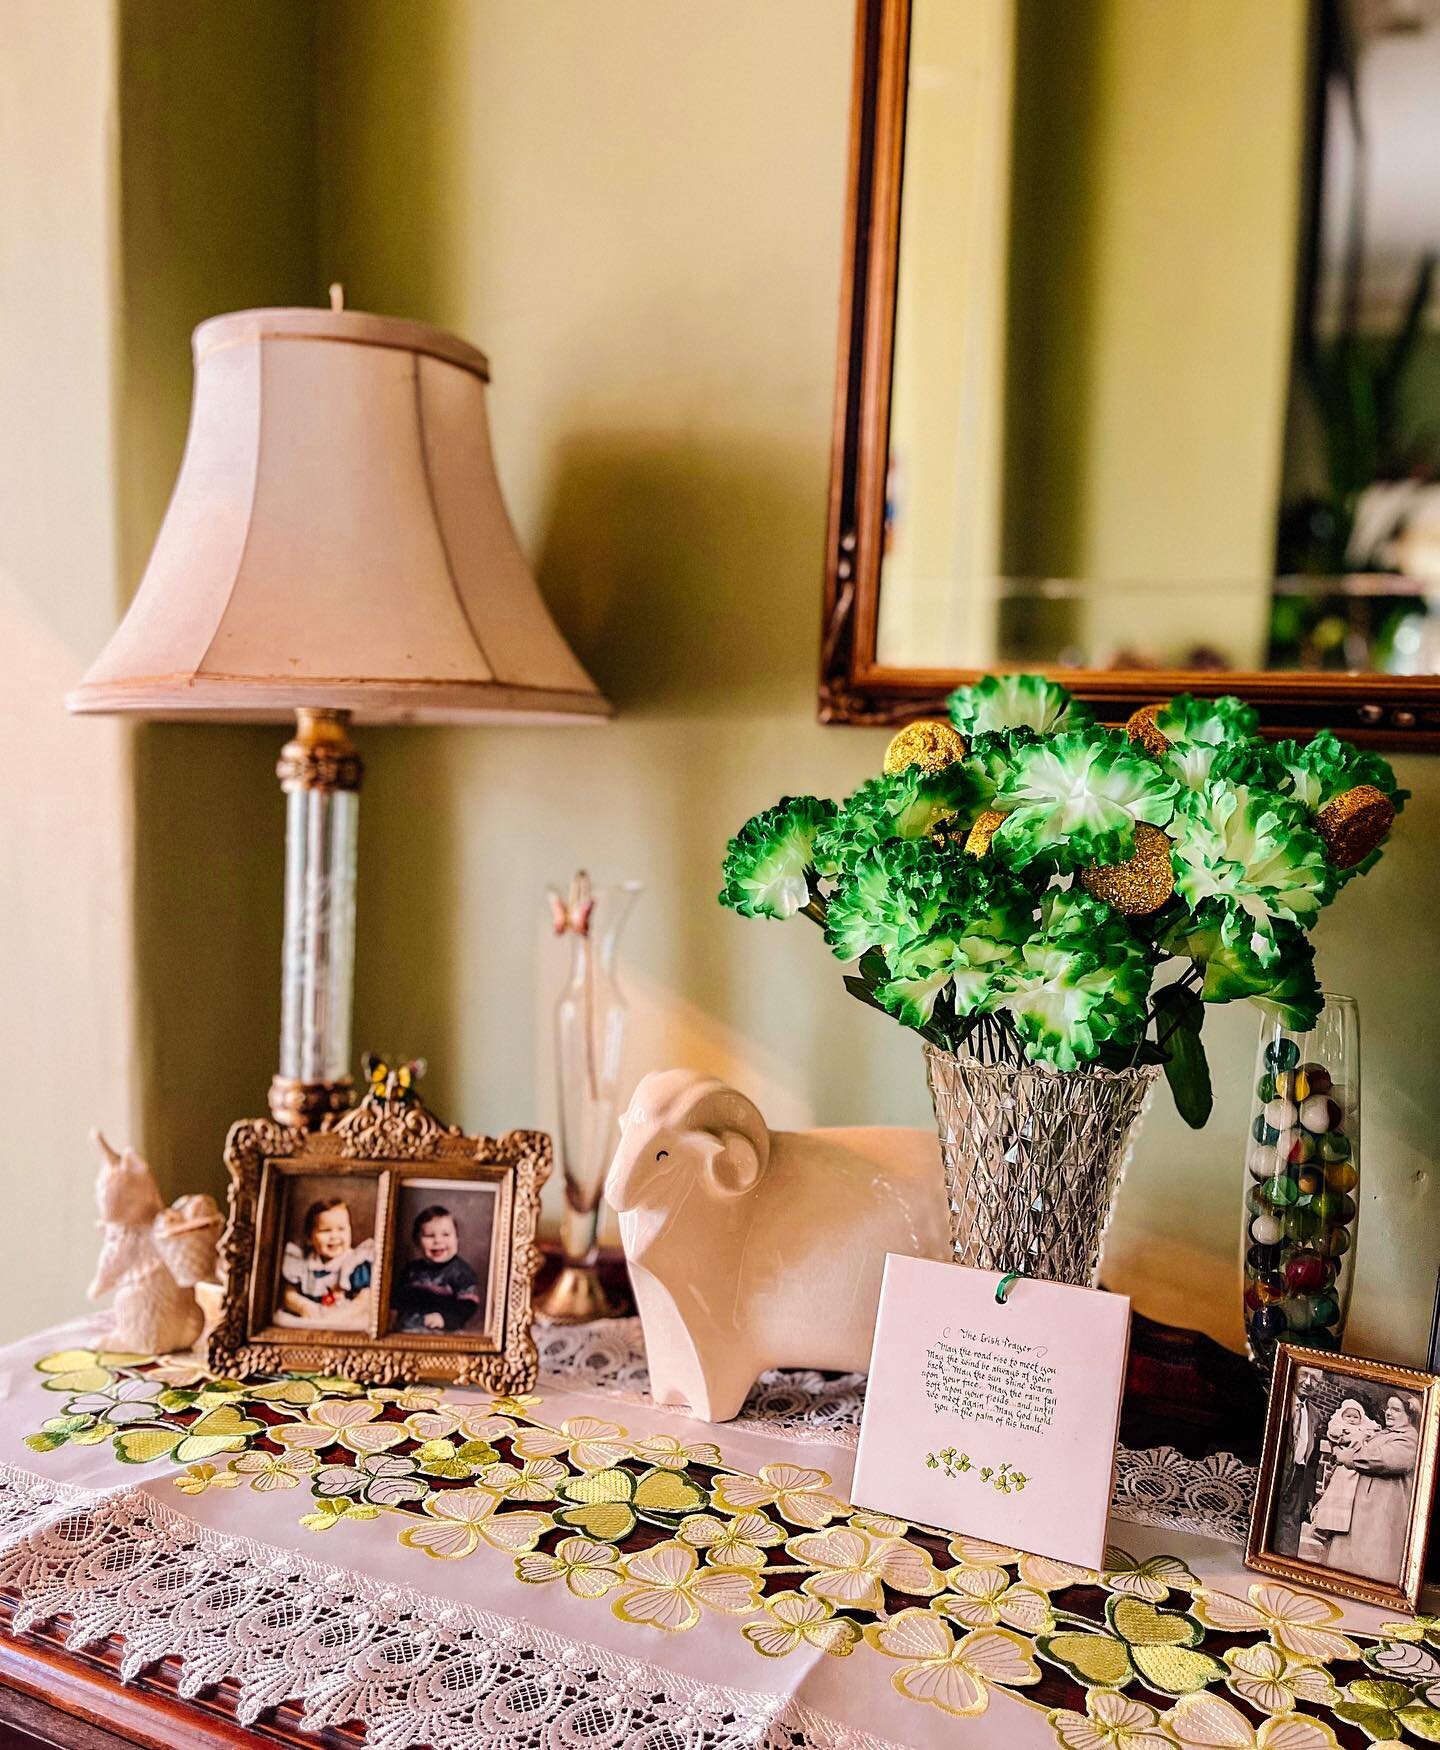 It&rsquo;s no secret we love holidays around here. What would The O&rsquo;Connell House be without a little St. Patrick&rsquo;s Day fun?! ☘️ 🌈 💚 🇮🇪 #happystpatricksday #happystpaddysday #proudtobeirish #luckoftheirish #irishhomes
&bull;
&bull;
&b